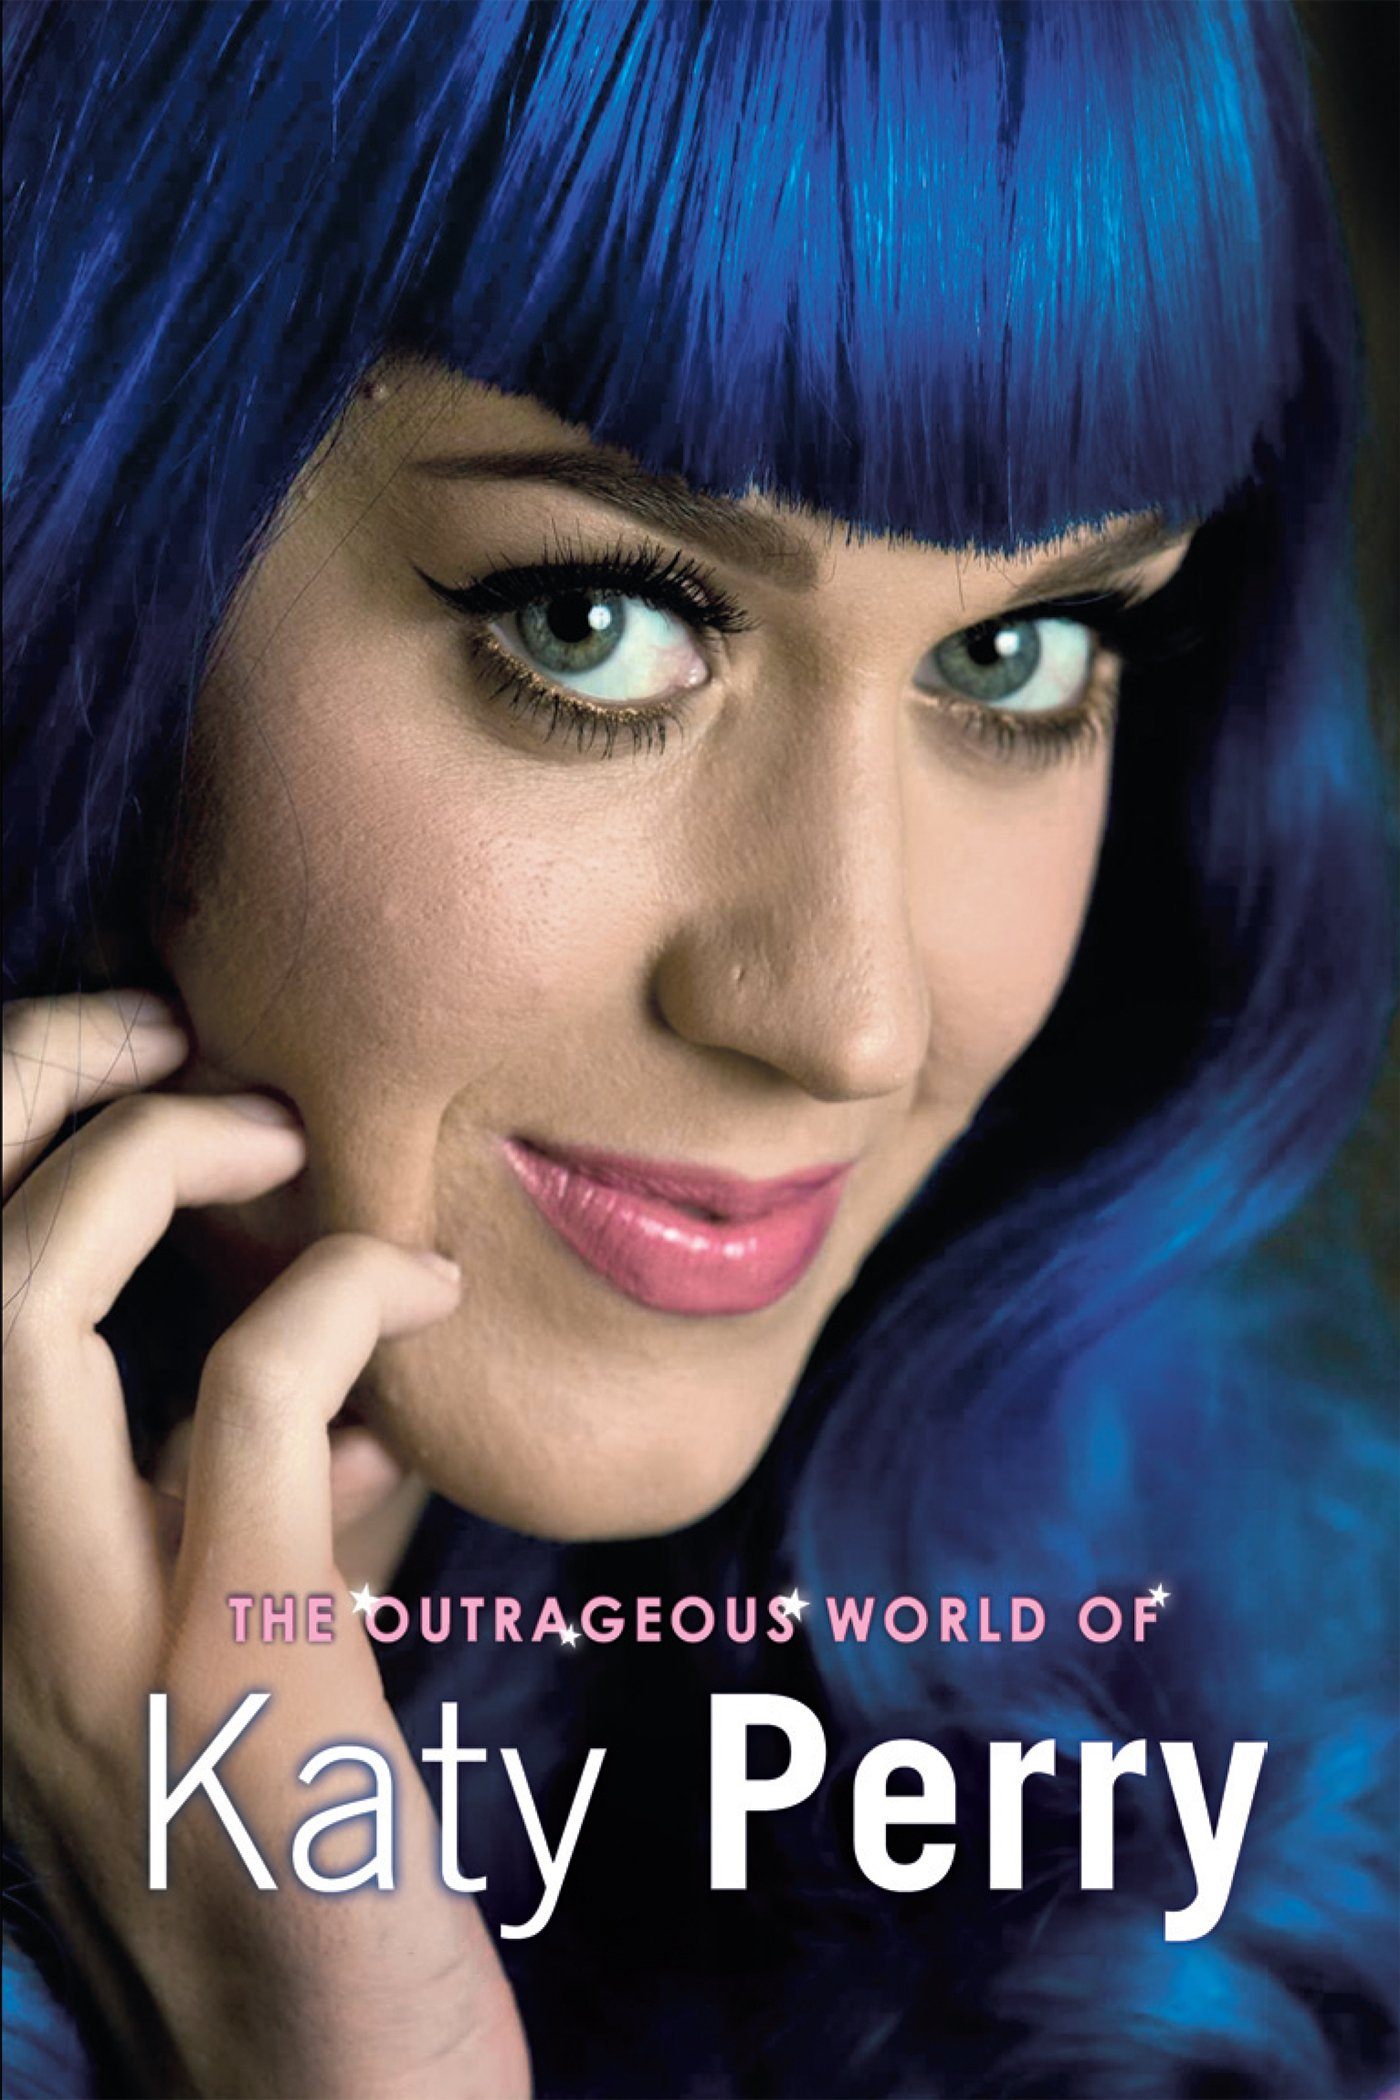 Katy Perry: The Outrageous World of Katy Perry Reviews + Where to Watch ...